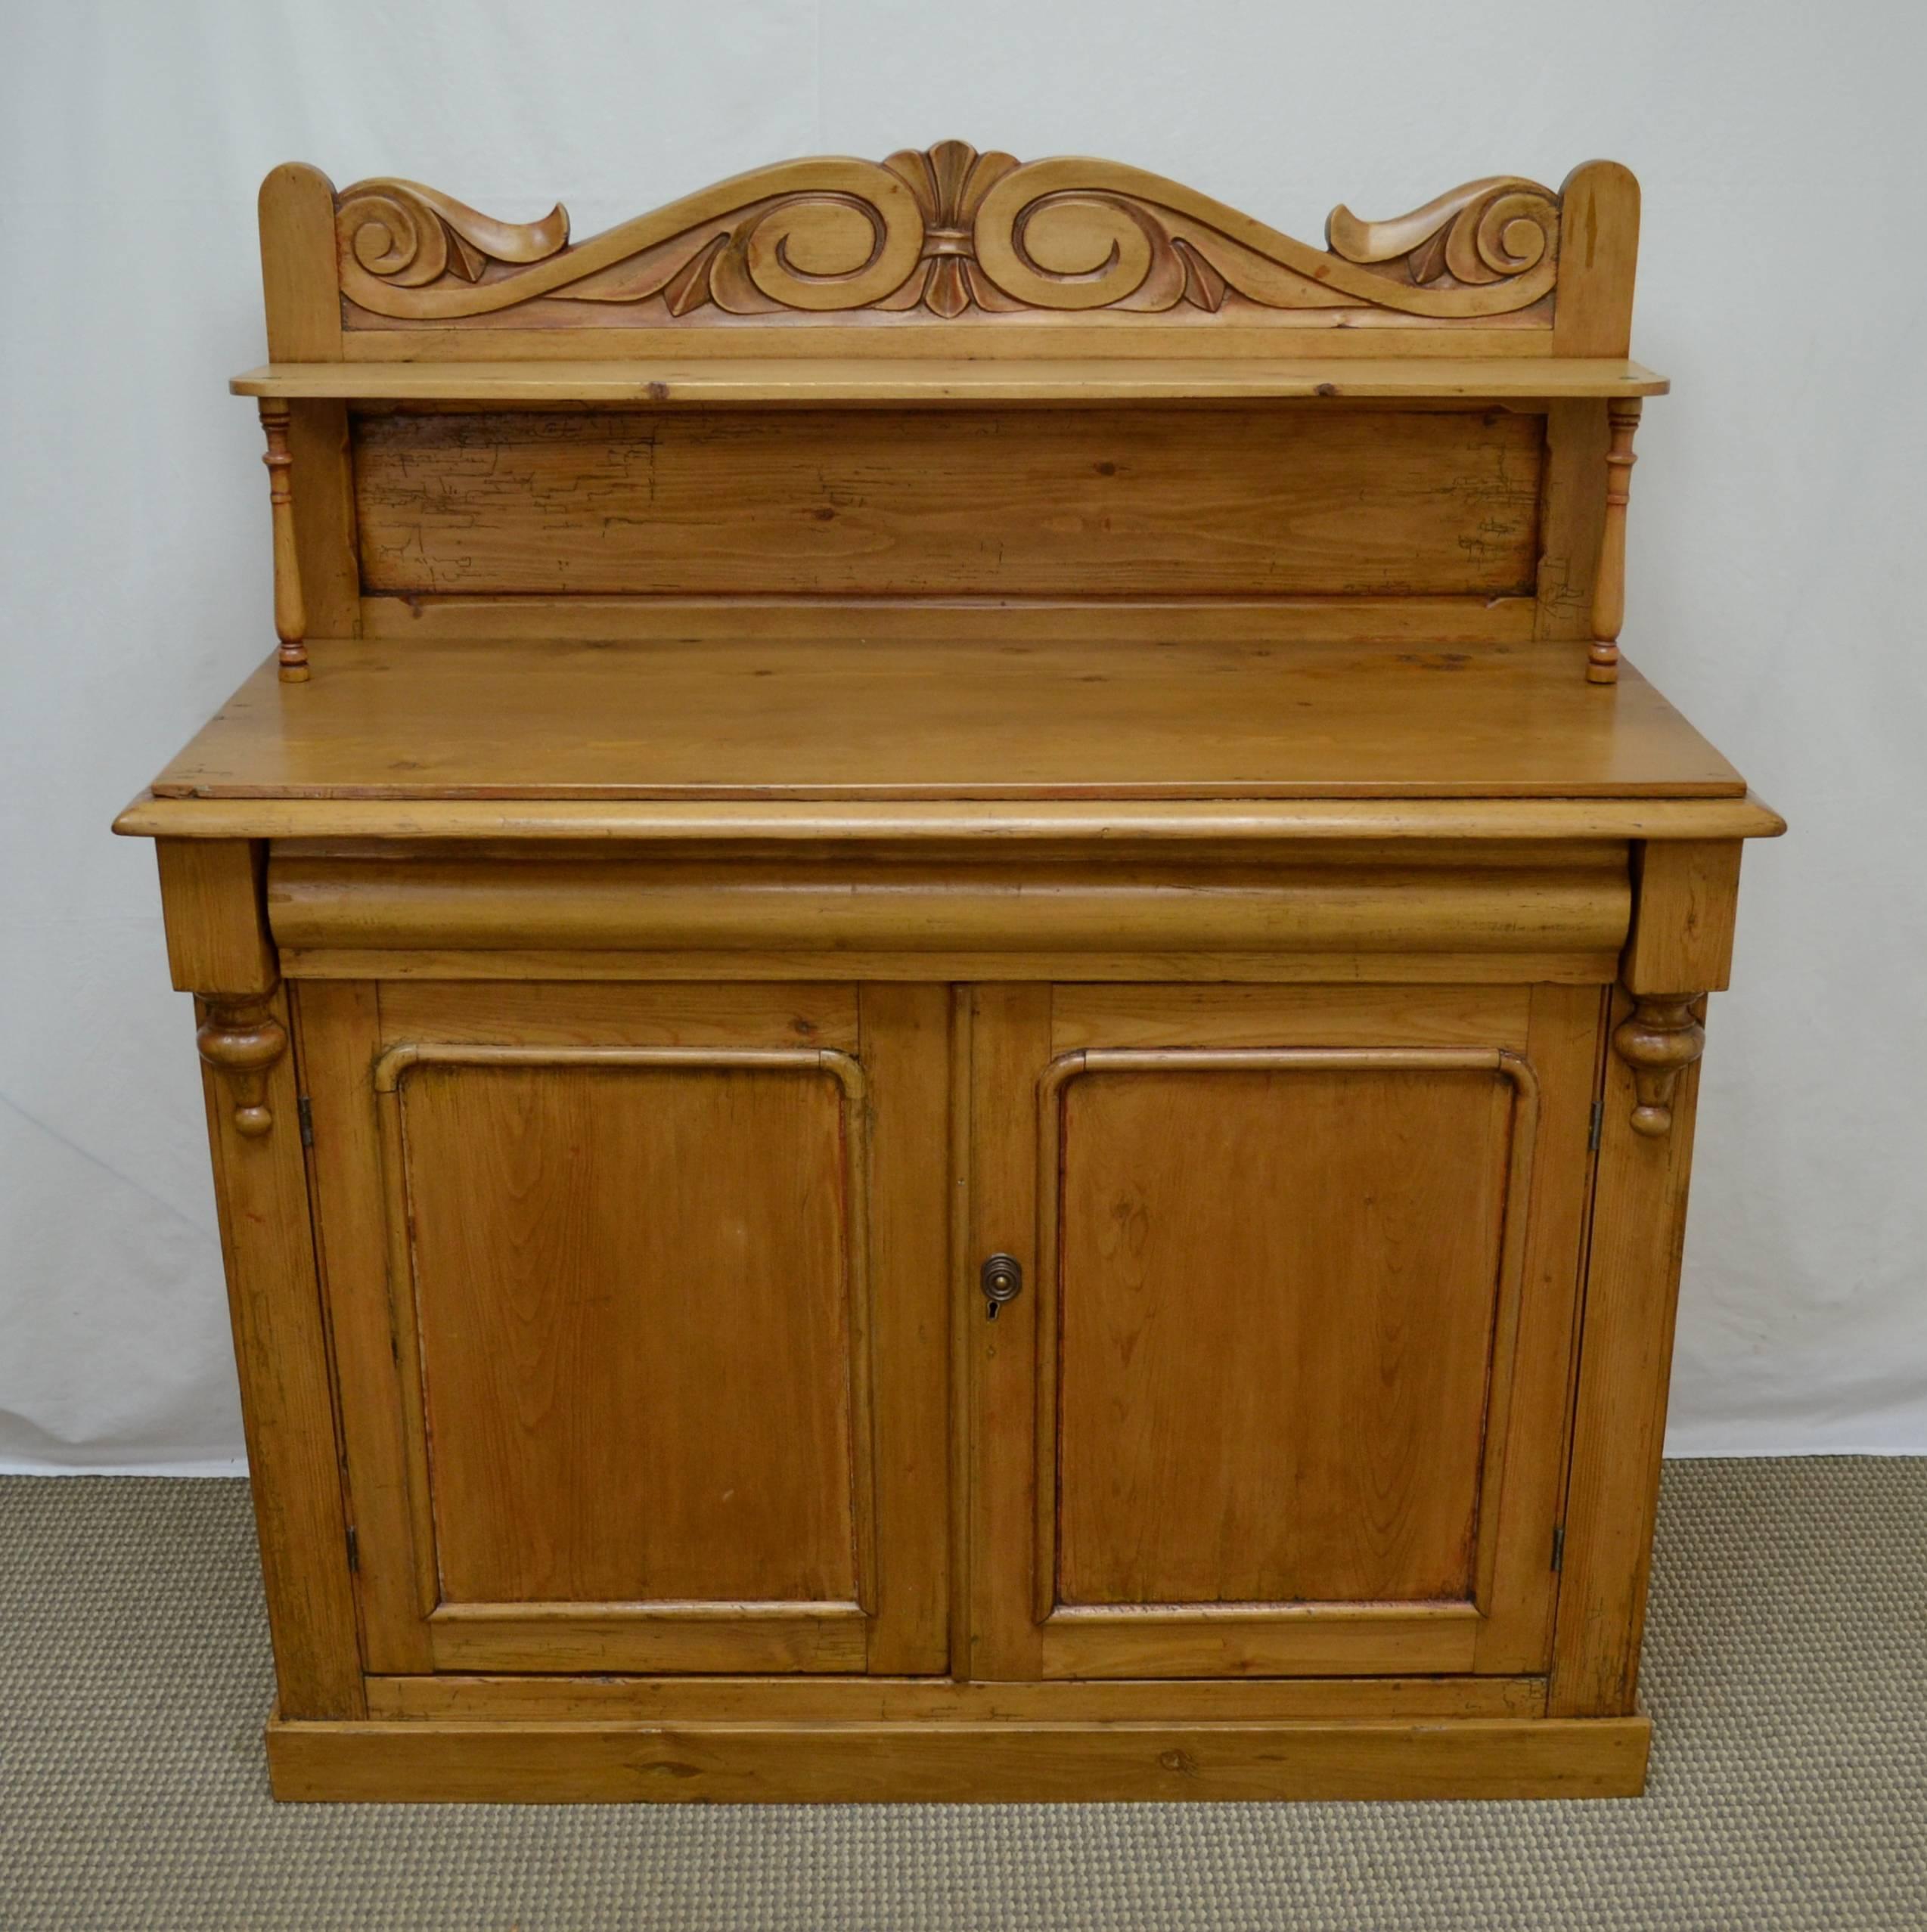 This is a charming little country chiffonier. The pine base features two paneled doors opening to a generous interior, divided by a single original shelf. The front corners have unusual split baluster and block corbels, flanking a long hand-cut